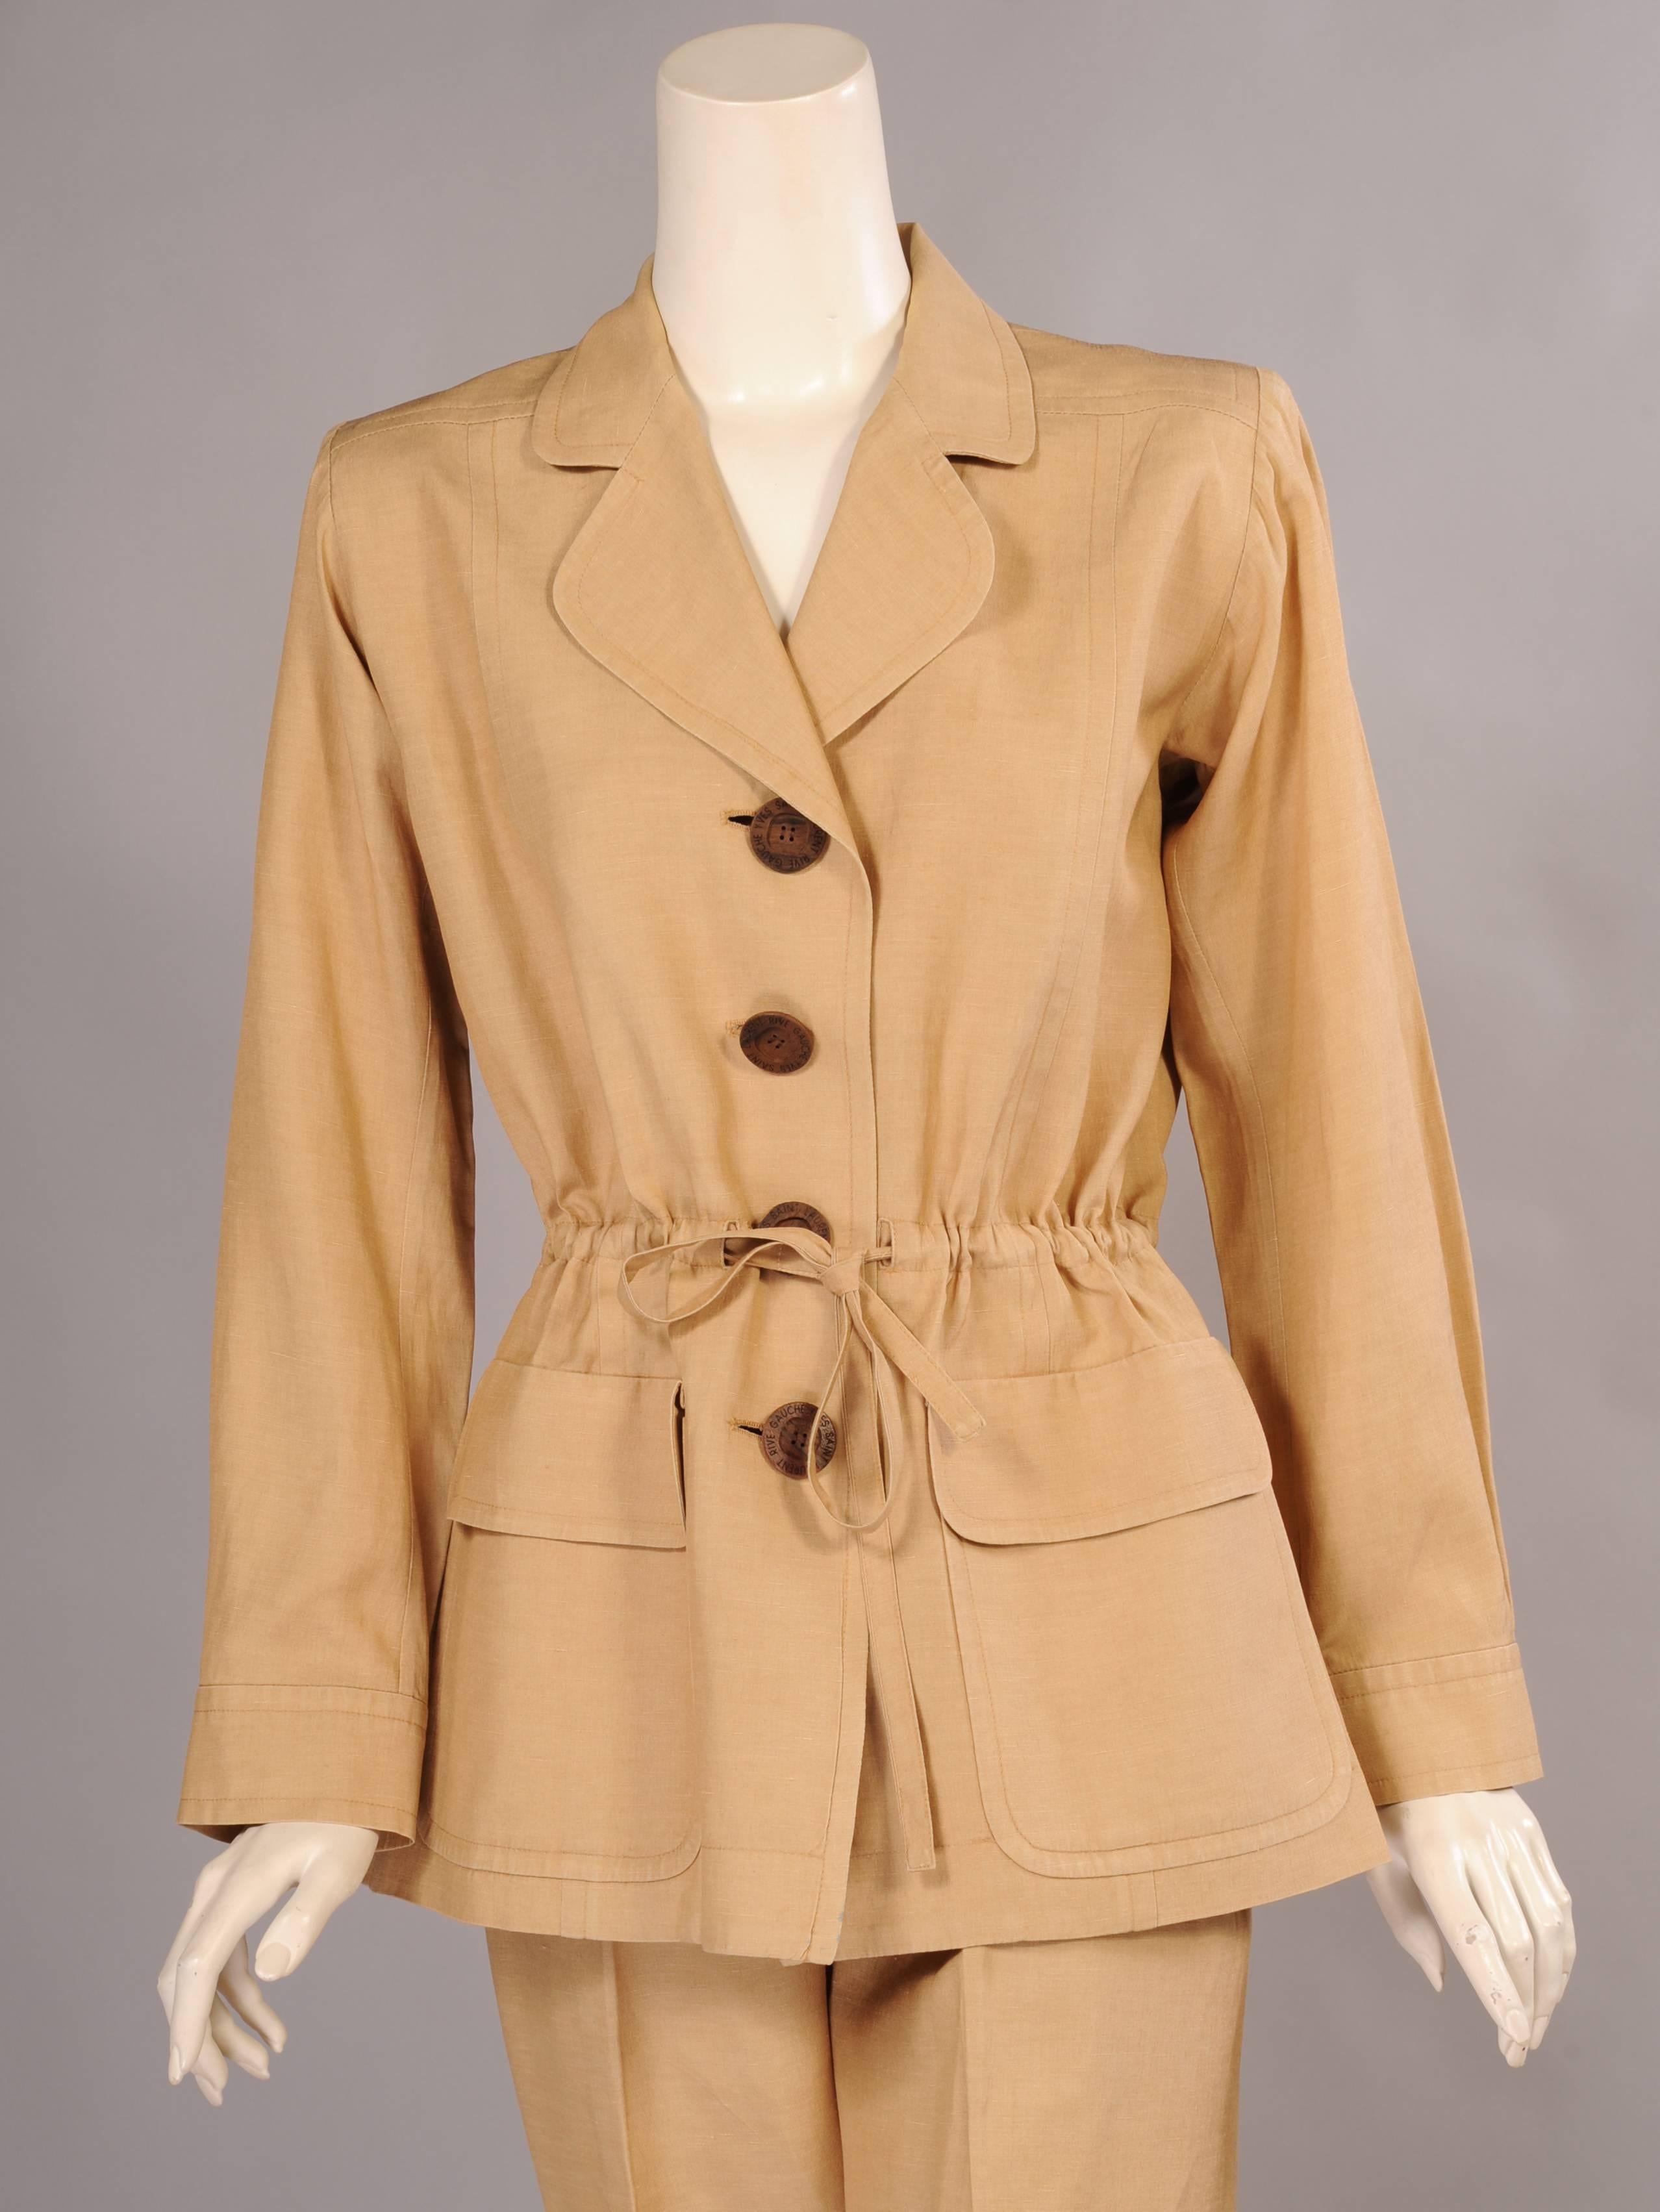 A perennial favorite from YSL, the safari suit has been designed in a number of variations. This version is silk, and the jacket has a tailored look. There is a notched collar, brown wooden logo buttons, a drawstring waist and two flap pockets. The